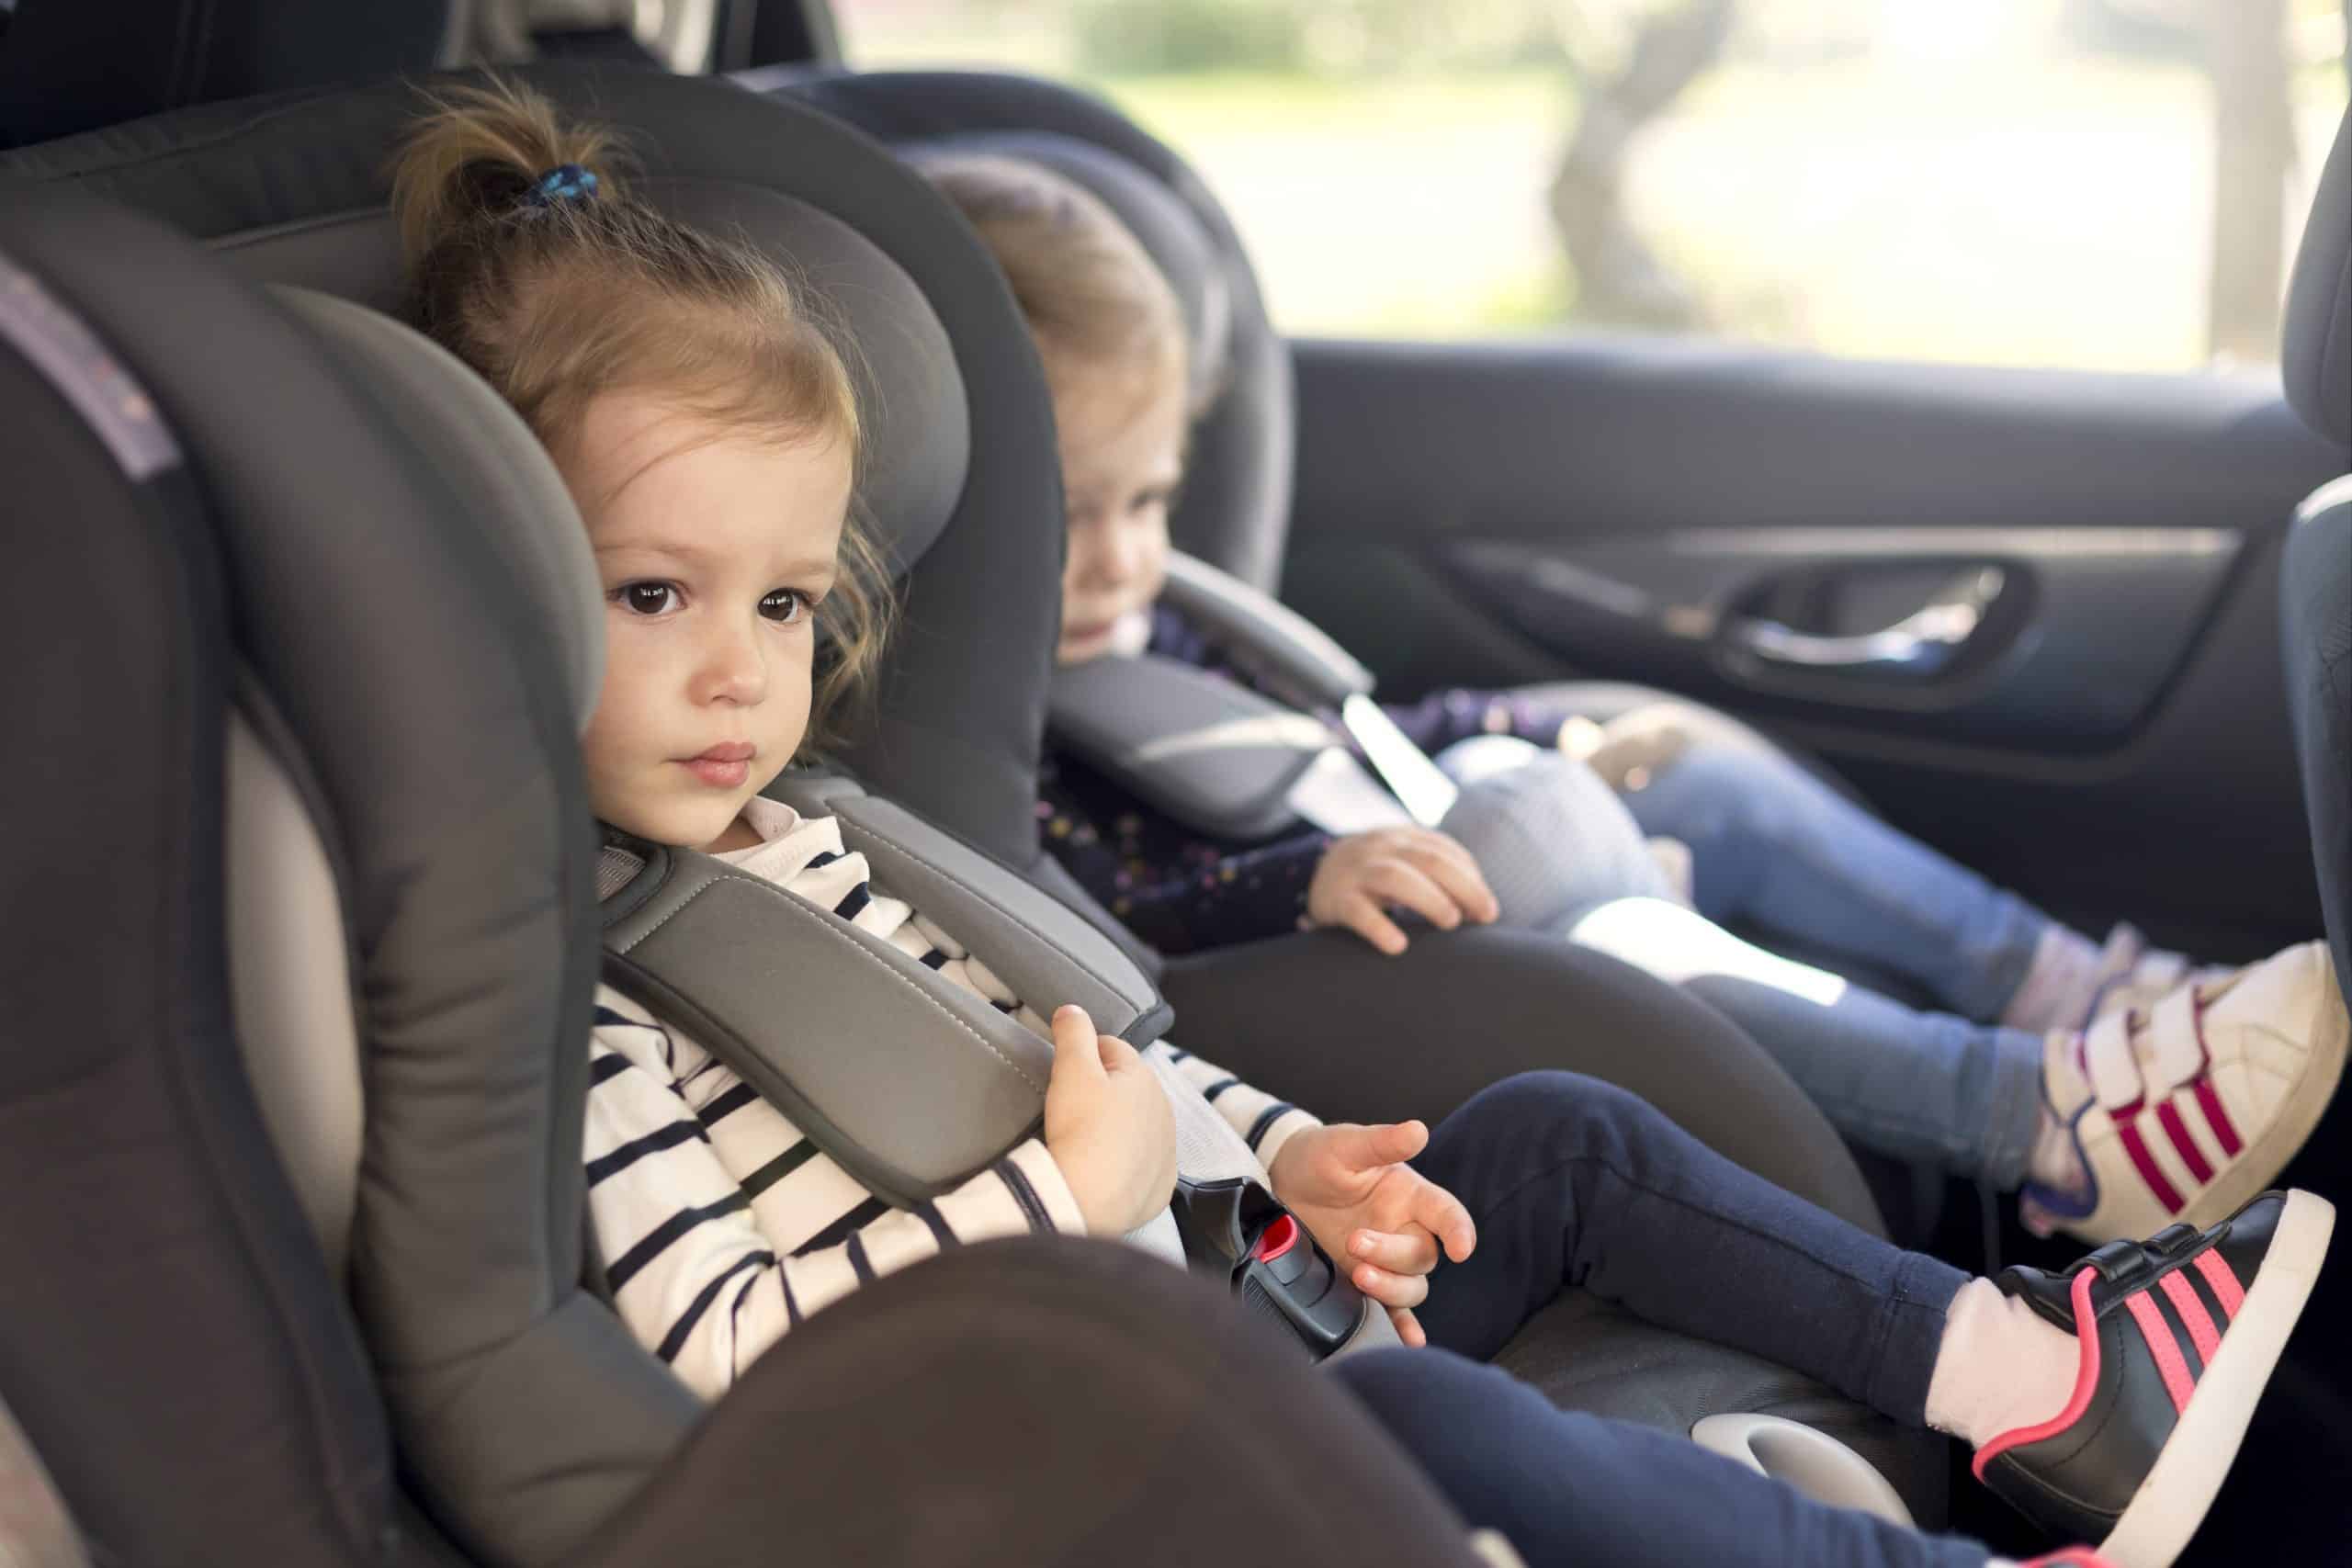 What are the types of car seats and what should I consider when buying one?